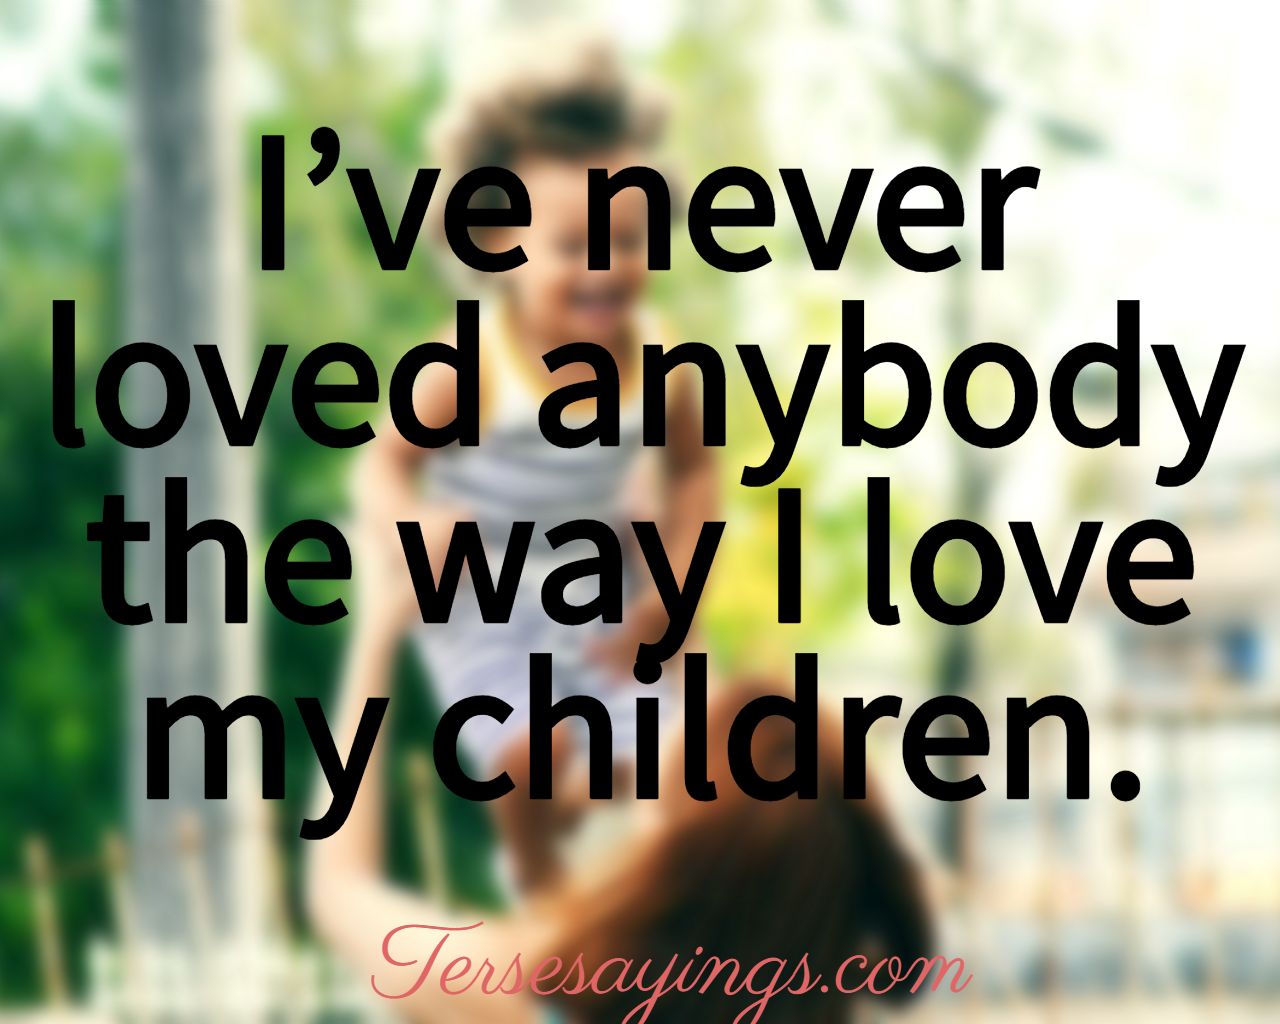 My children are my life quotes 